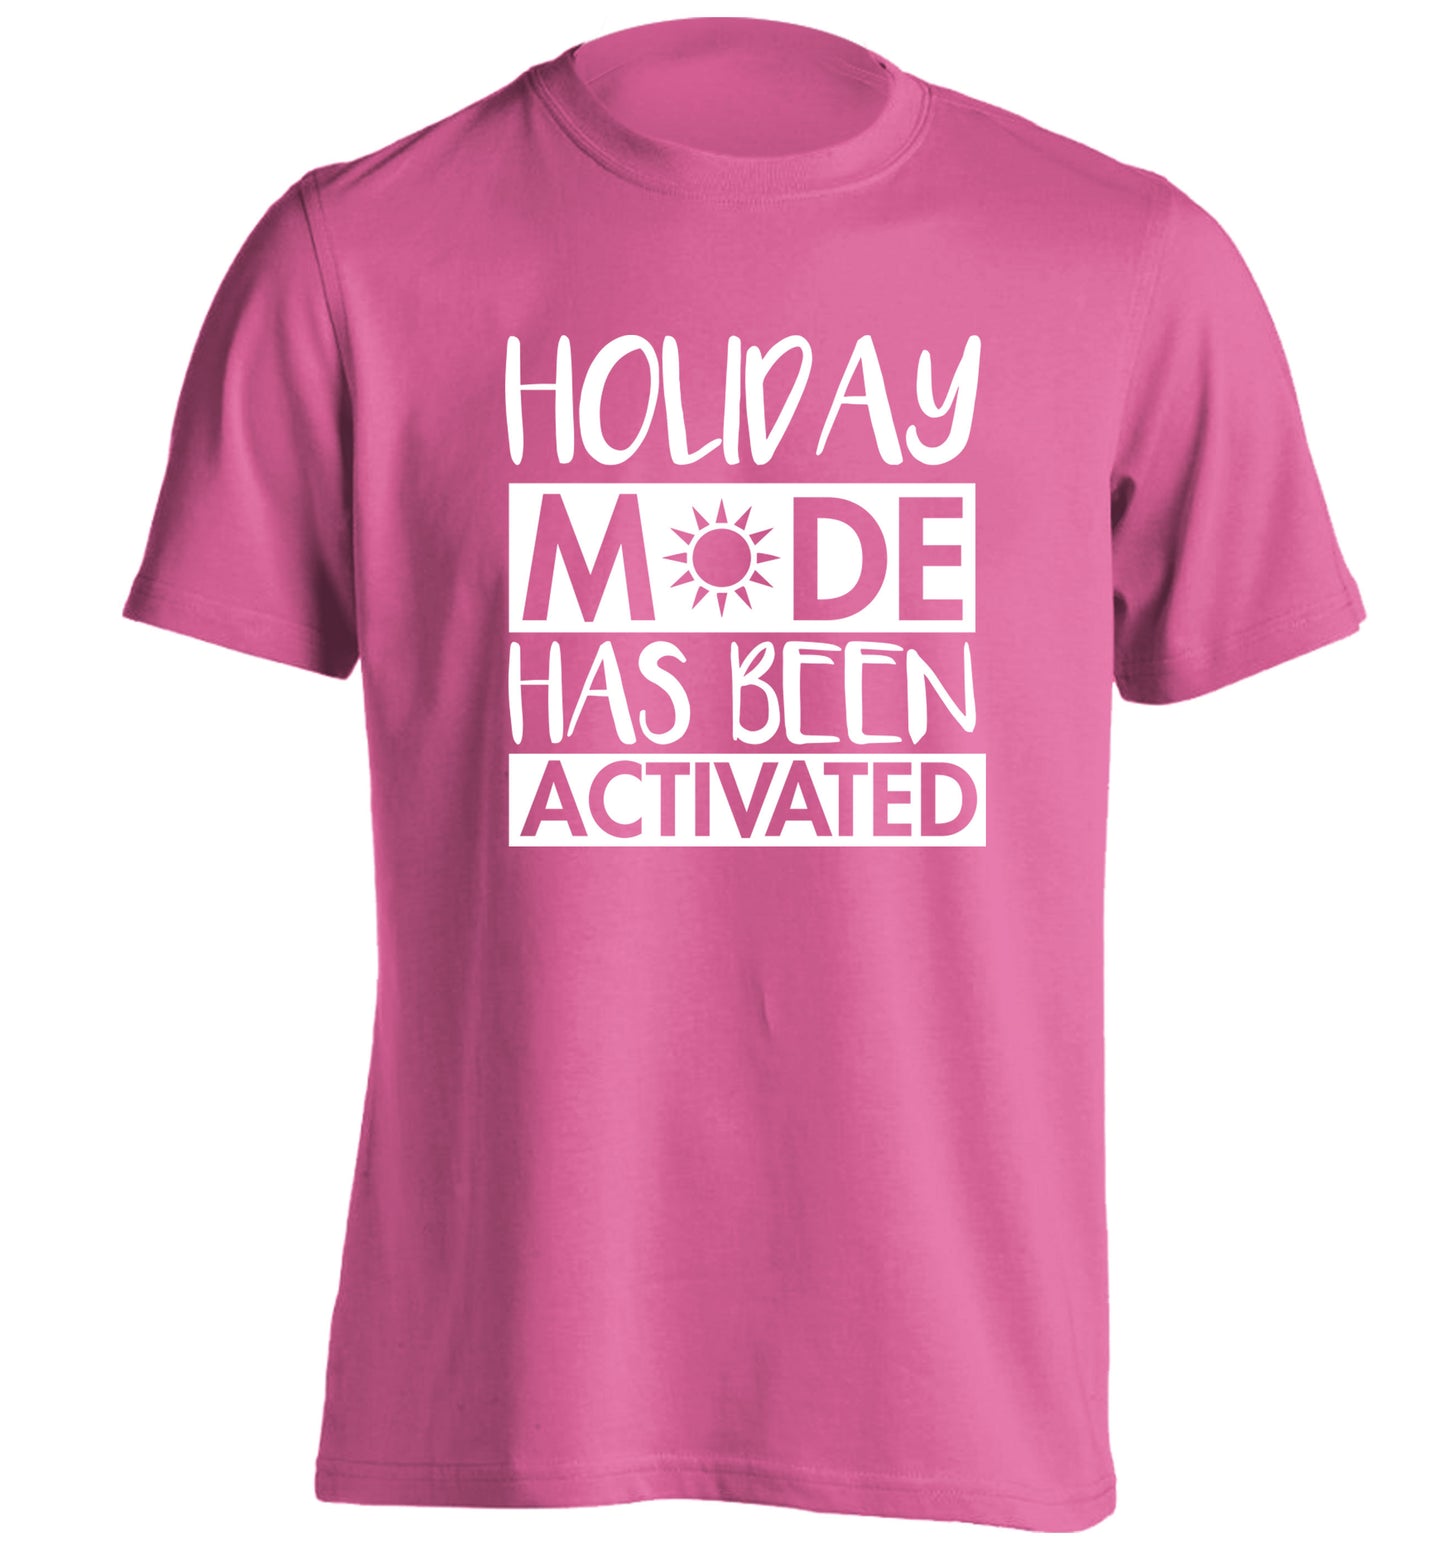 Holiday mode has been activated adults unisex pink Tshirt 2XL